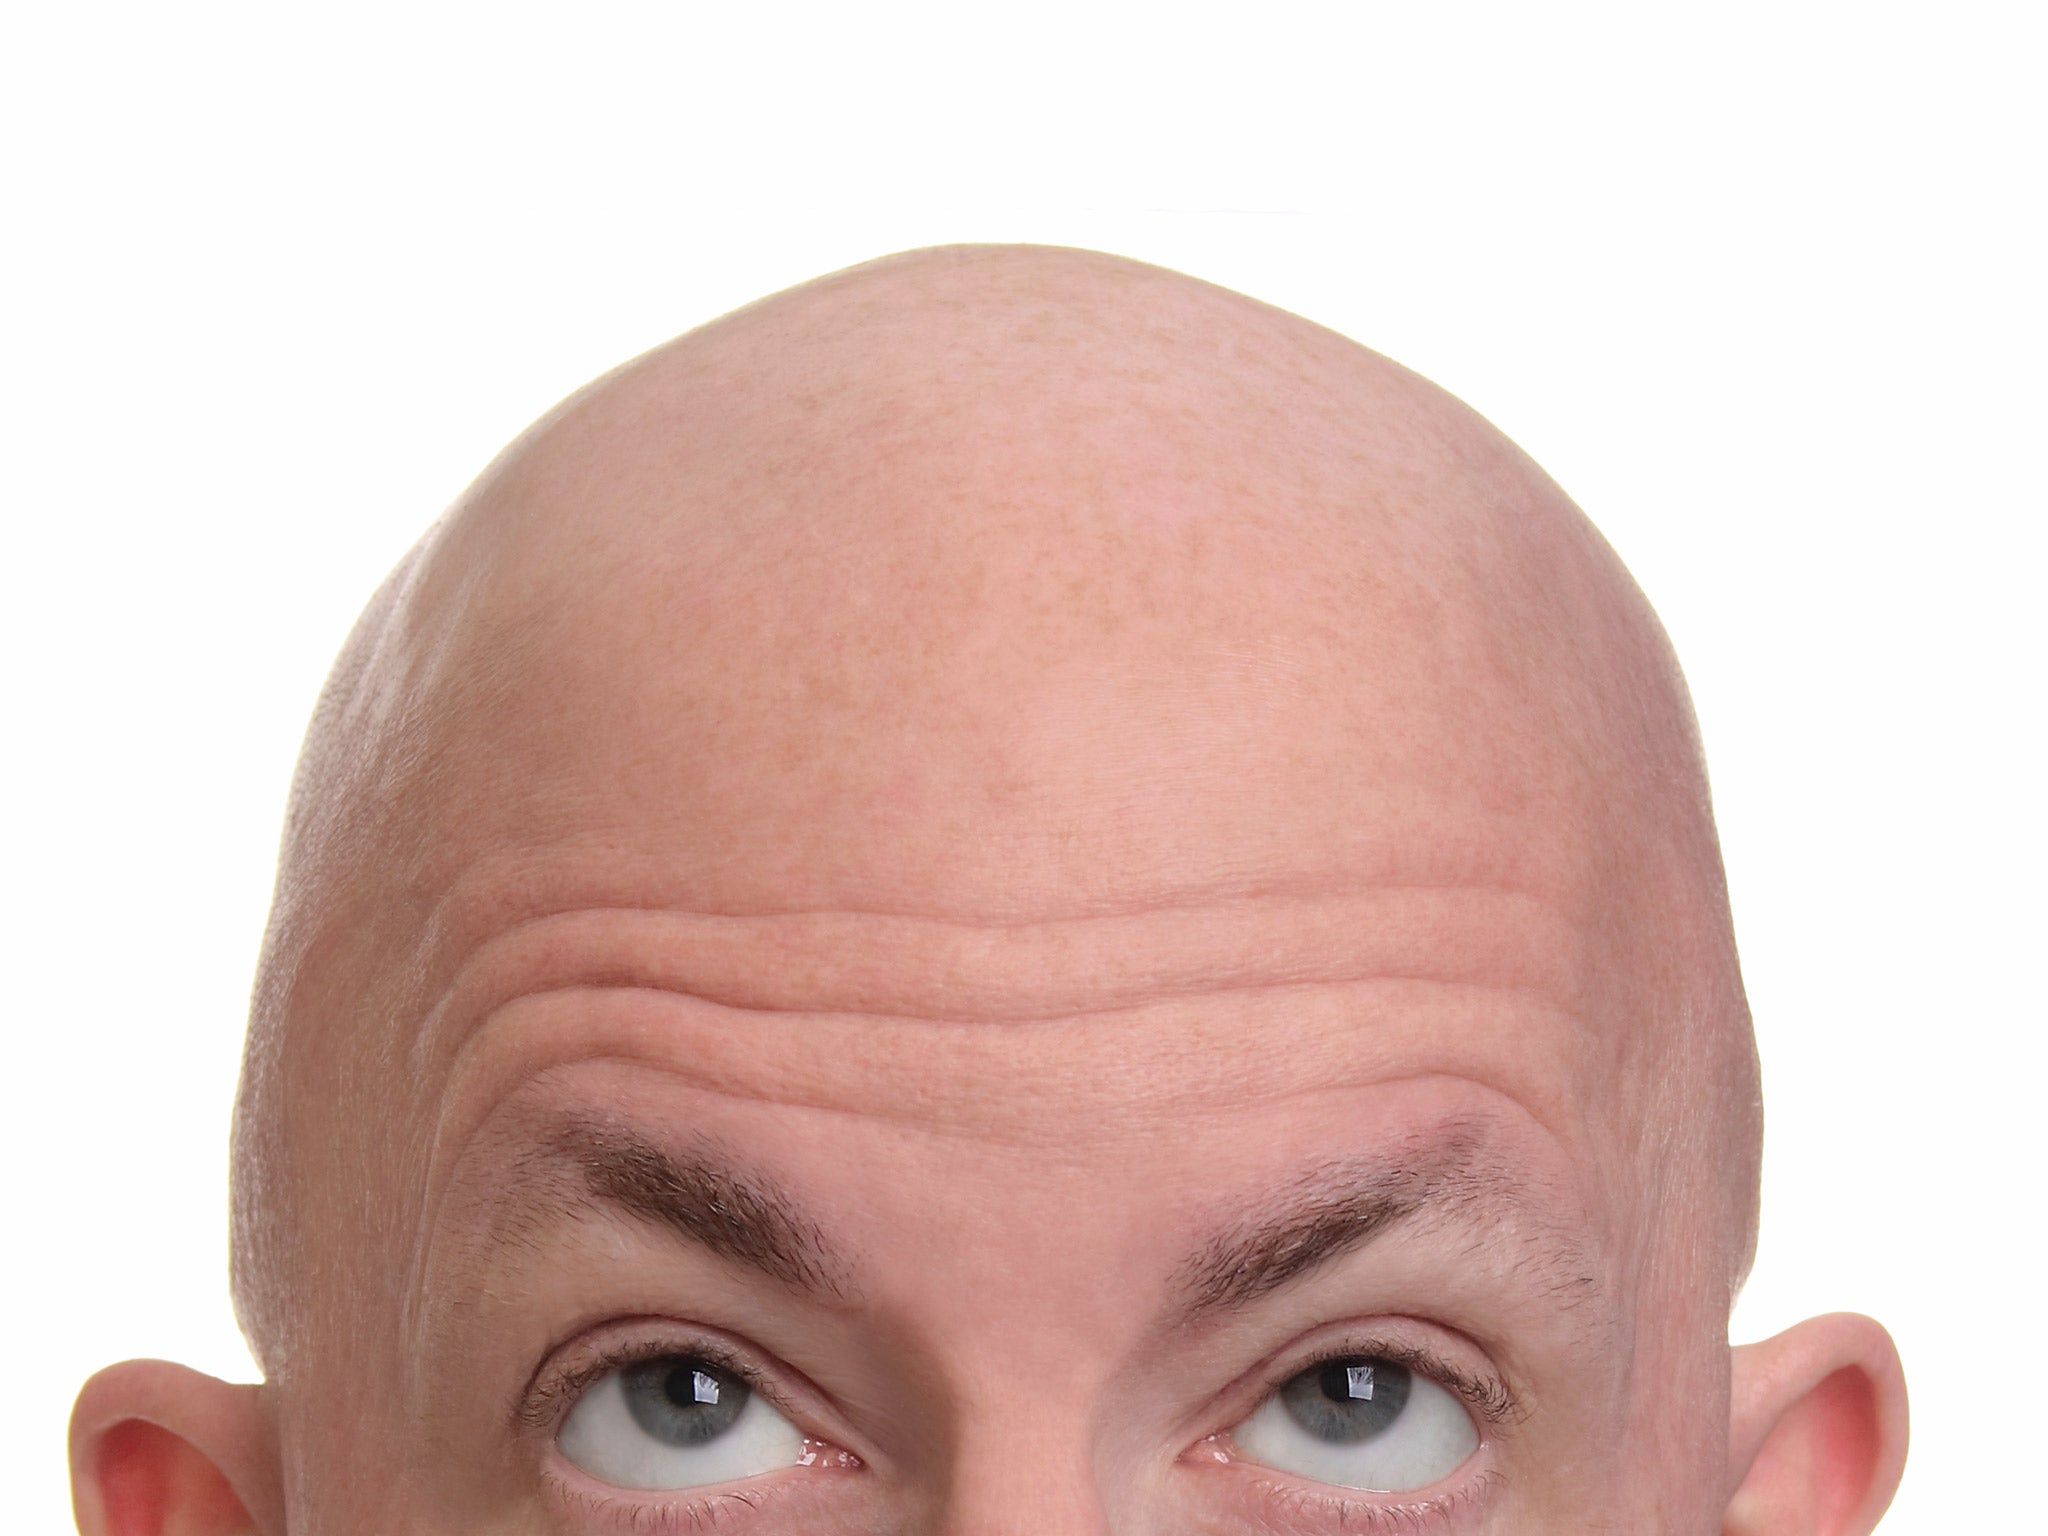 Baldness And Thinning Hair Are Due To Aging Dna Study Finds The